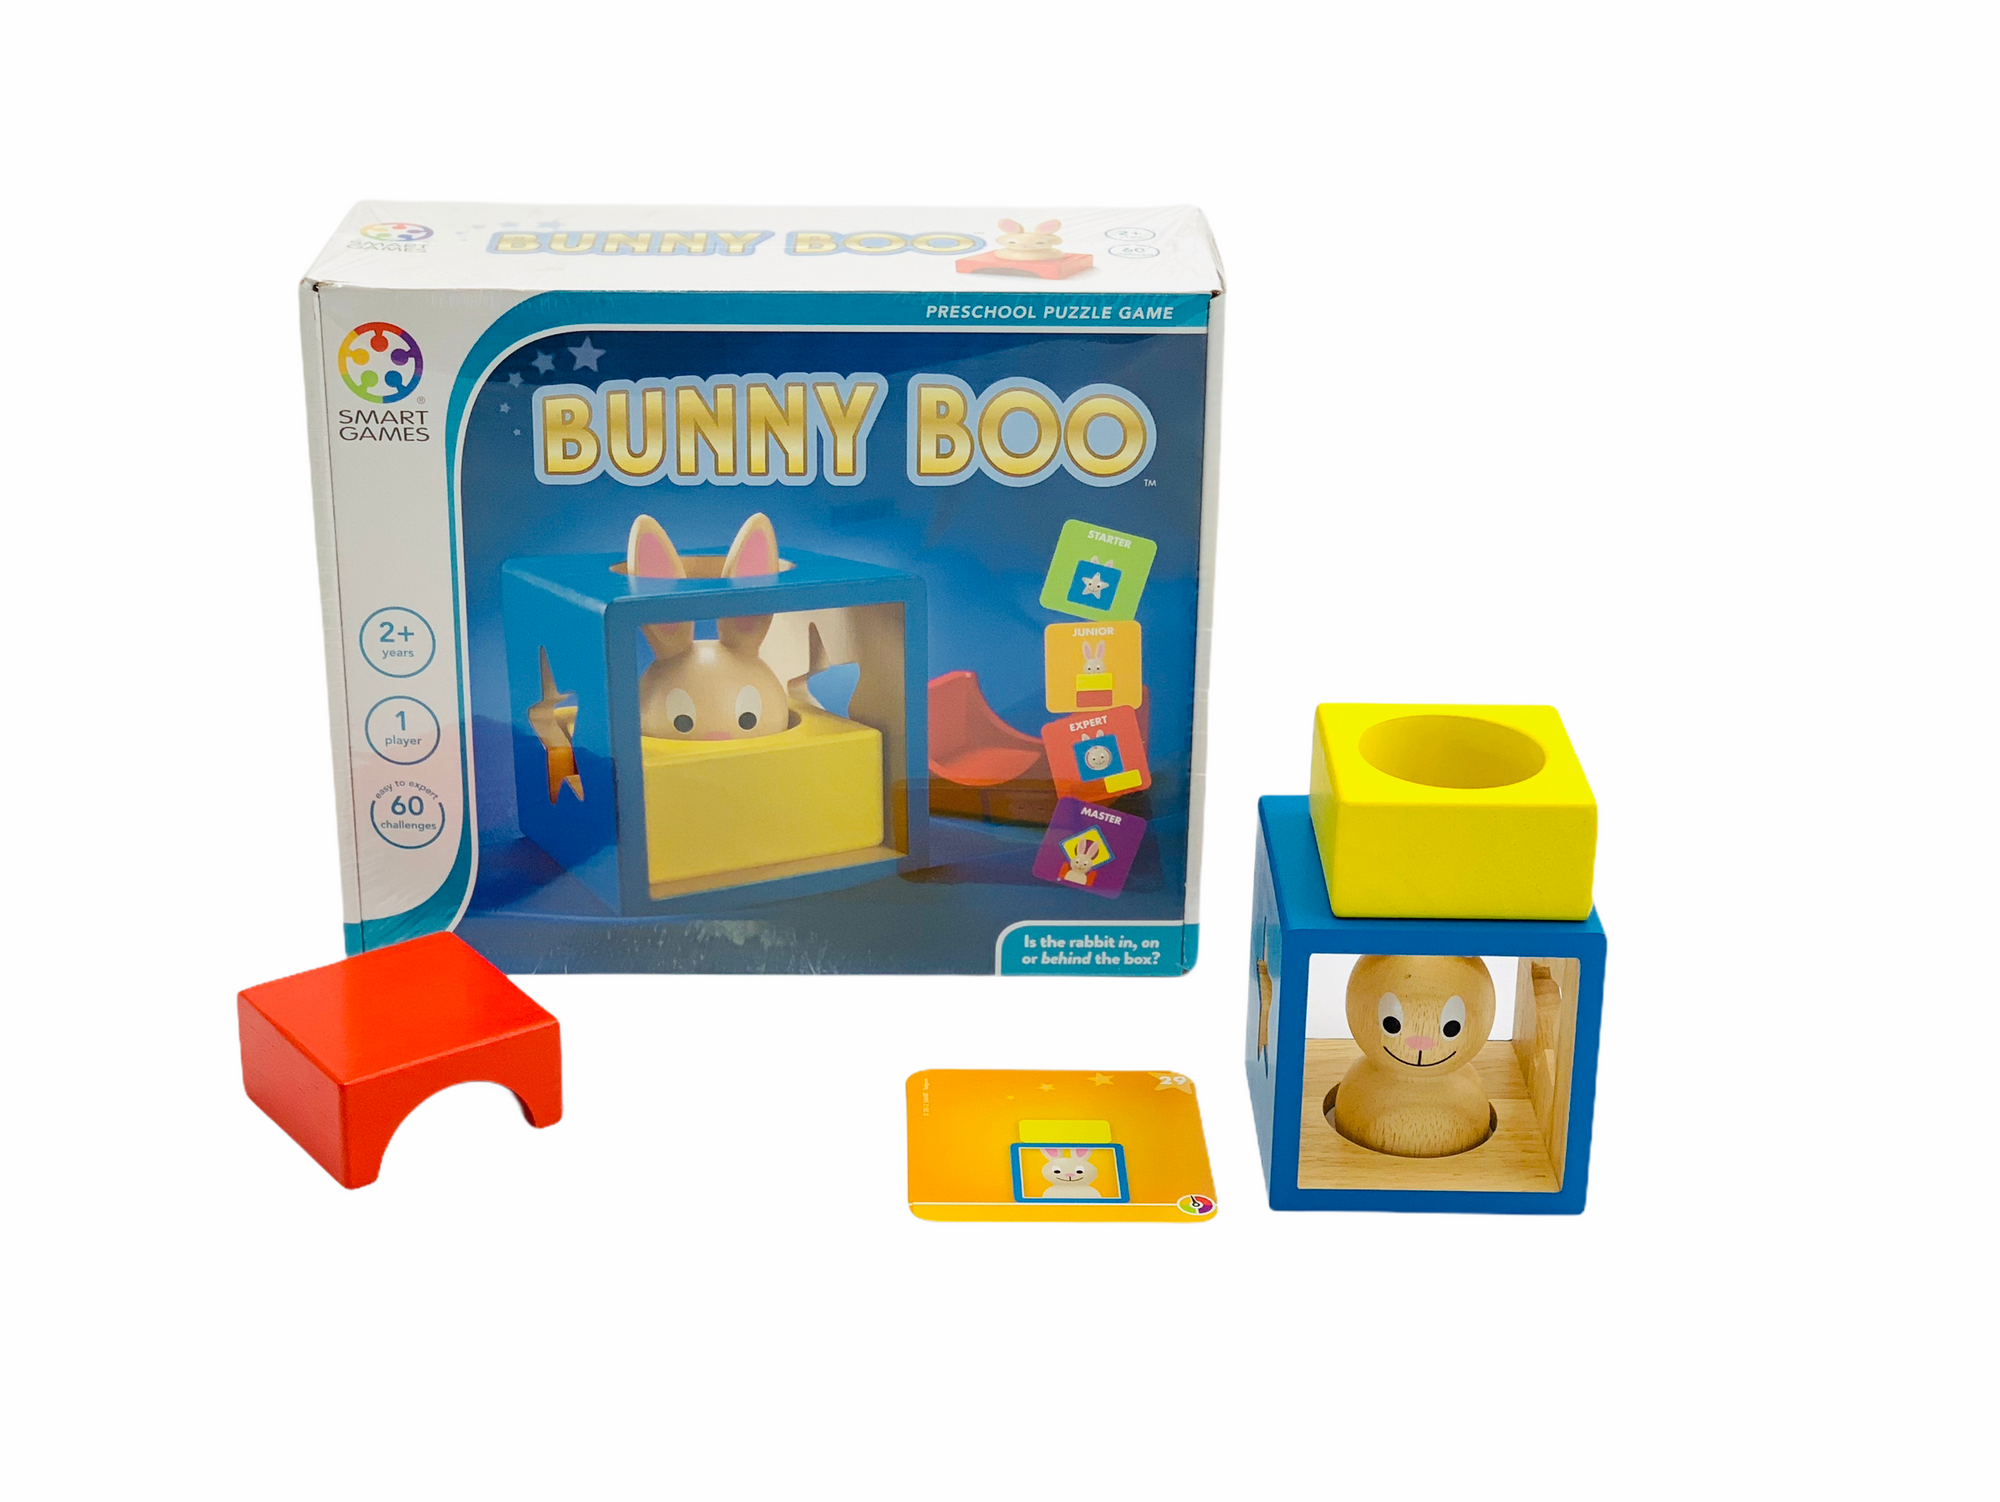 Smart Games Bunny Boo Game